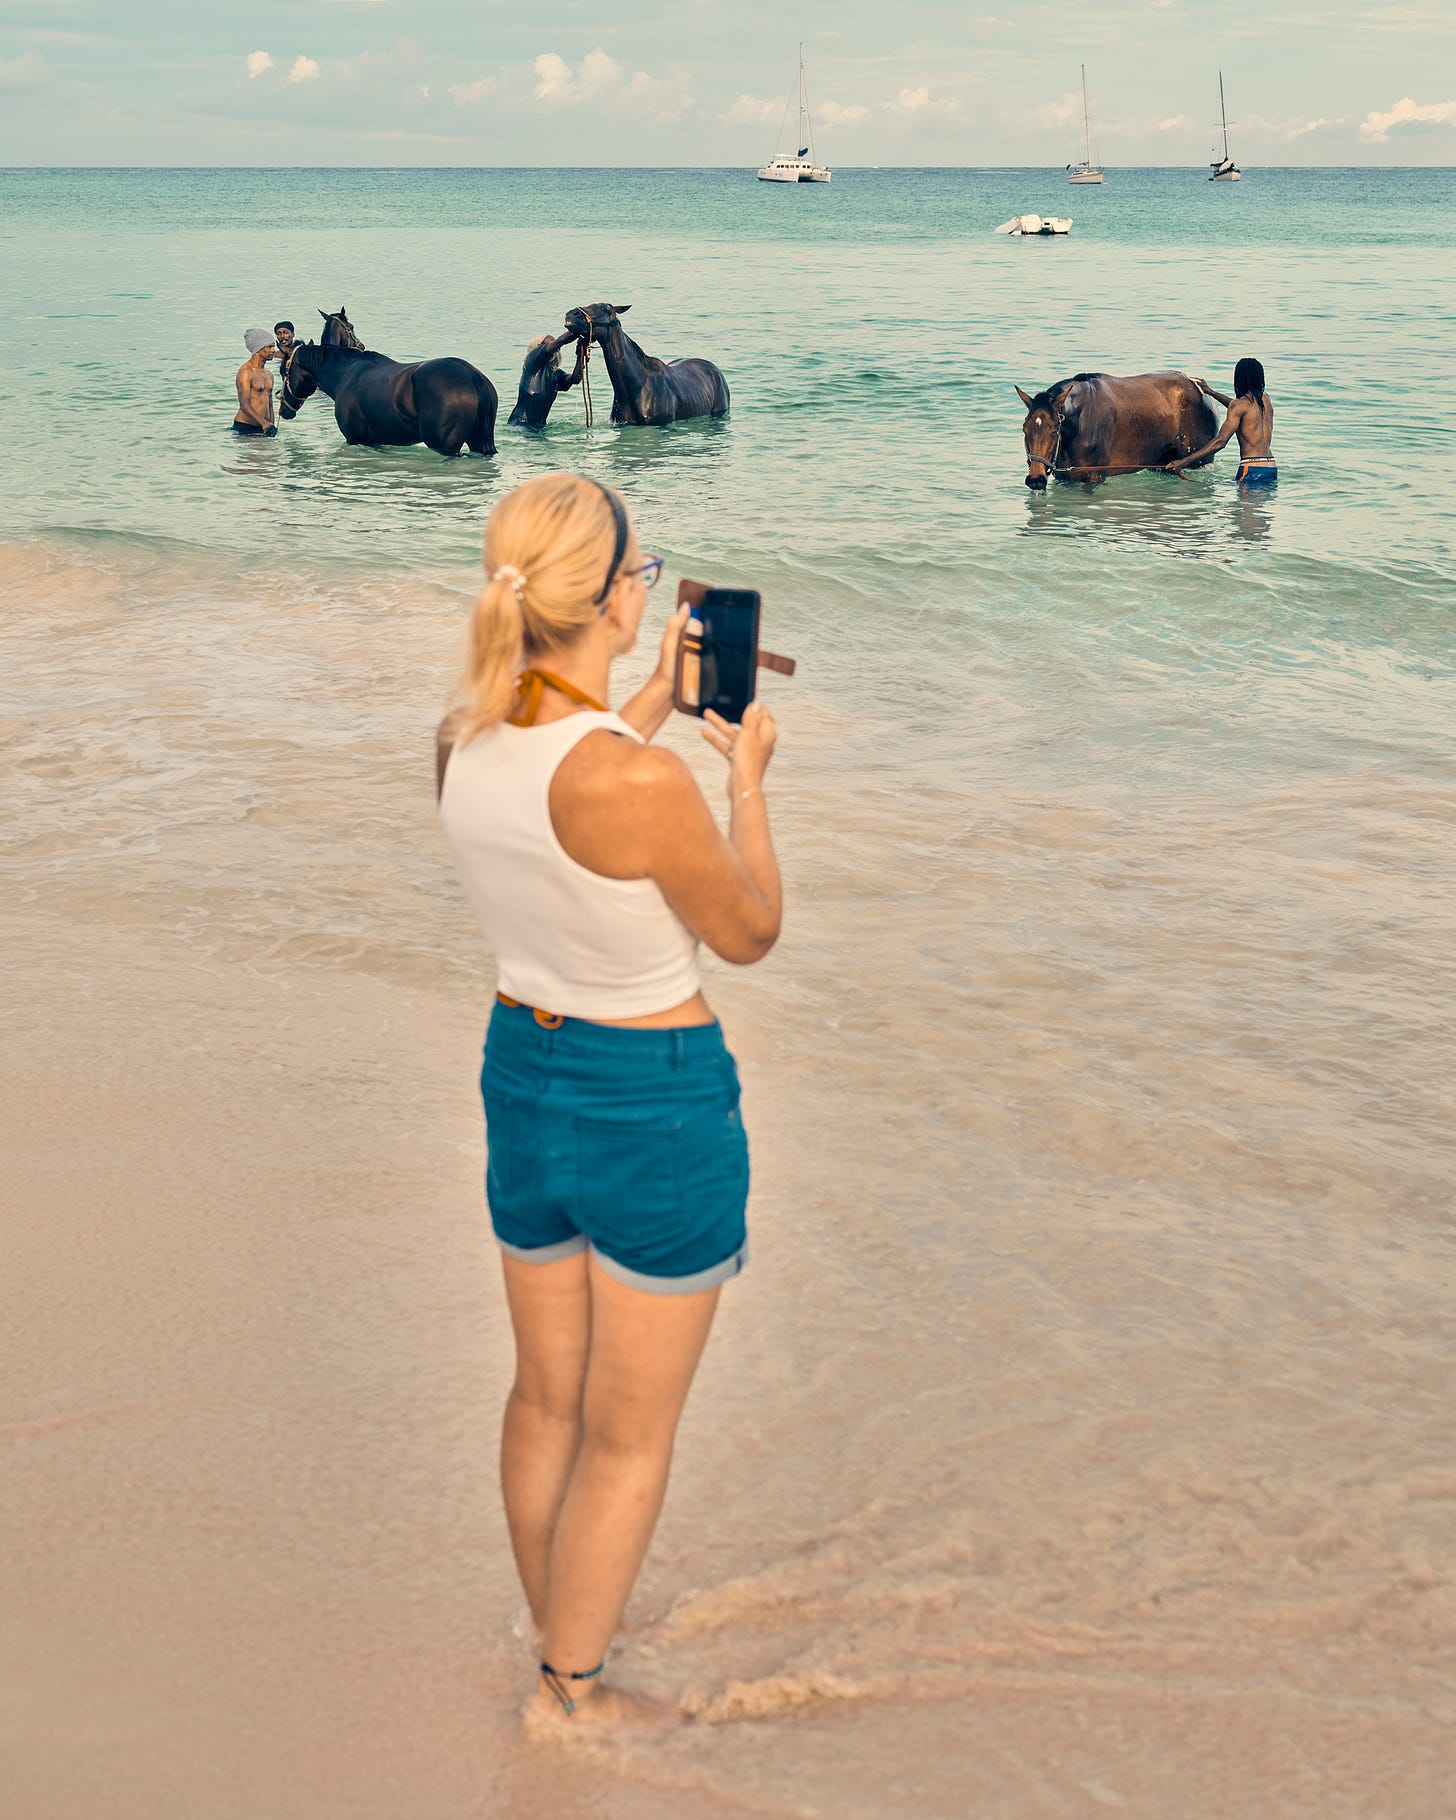 A tourist photographs caretakers bathing racehorses on Pebbles Beach. Horse racing, polo, and cricket are all commonplace in Barbados and a direct inheritance of the British colonial past. (Christopher Gregory-Rivera for TIME)